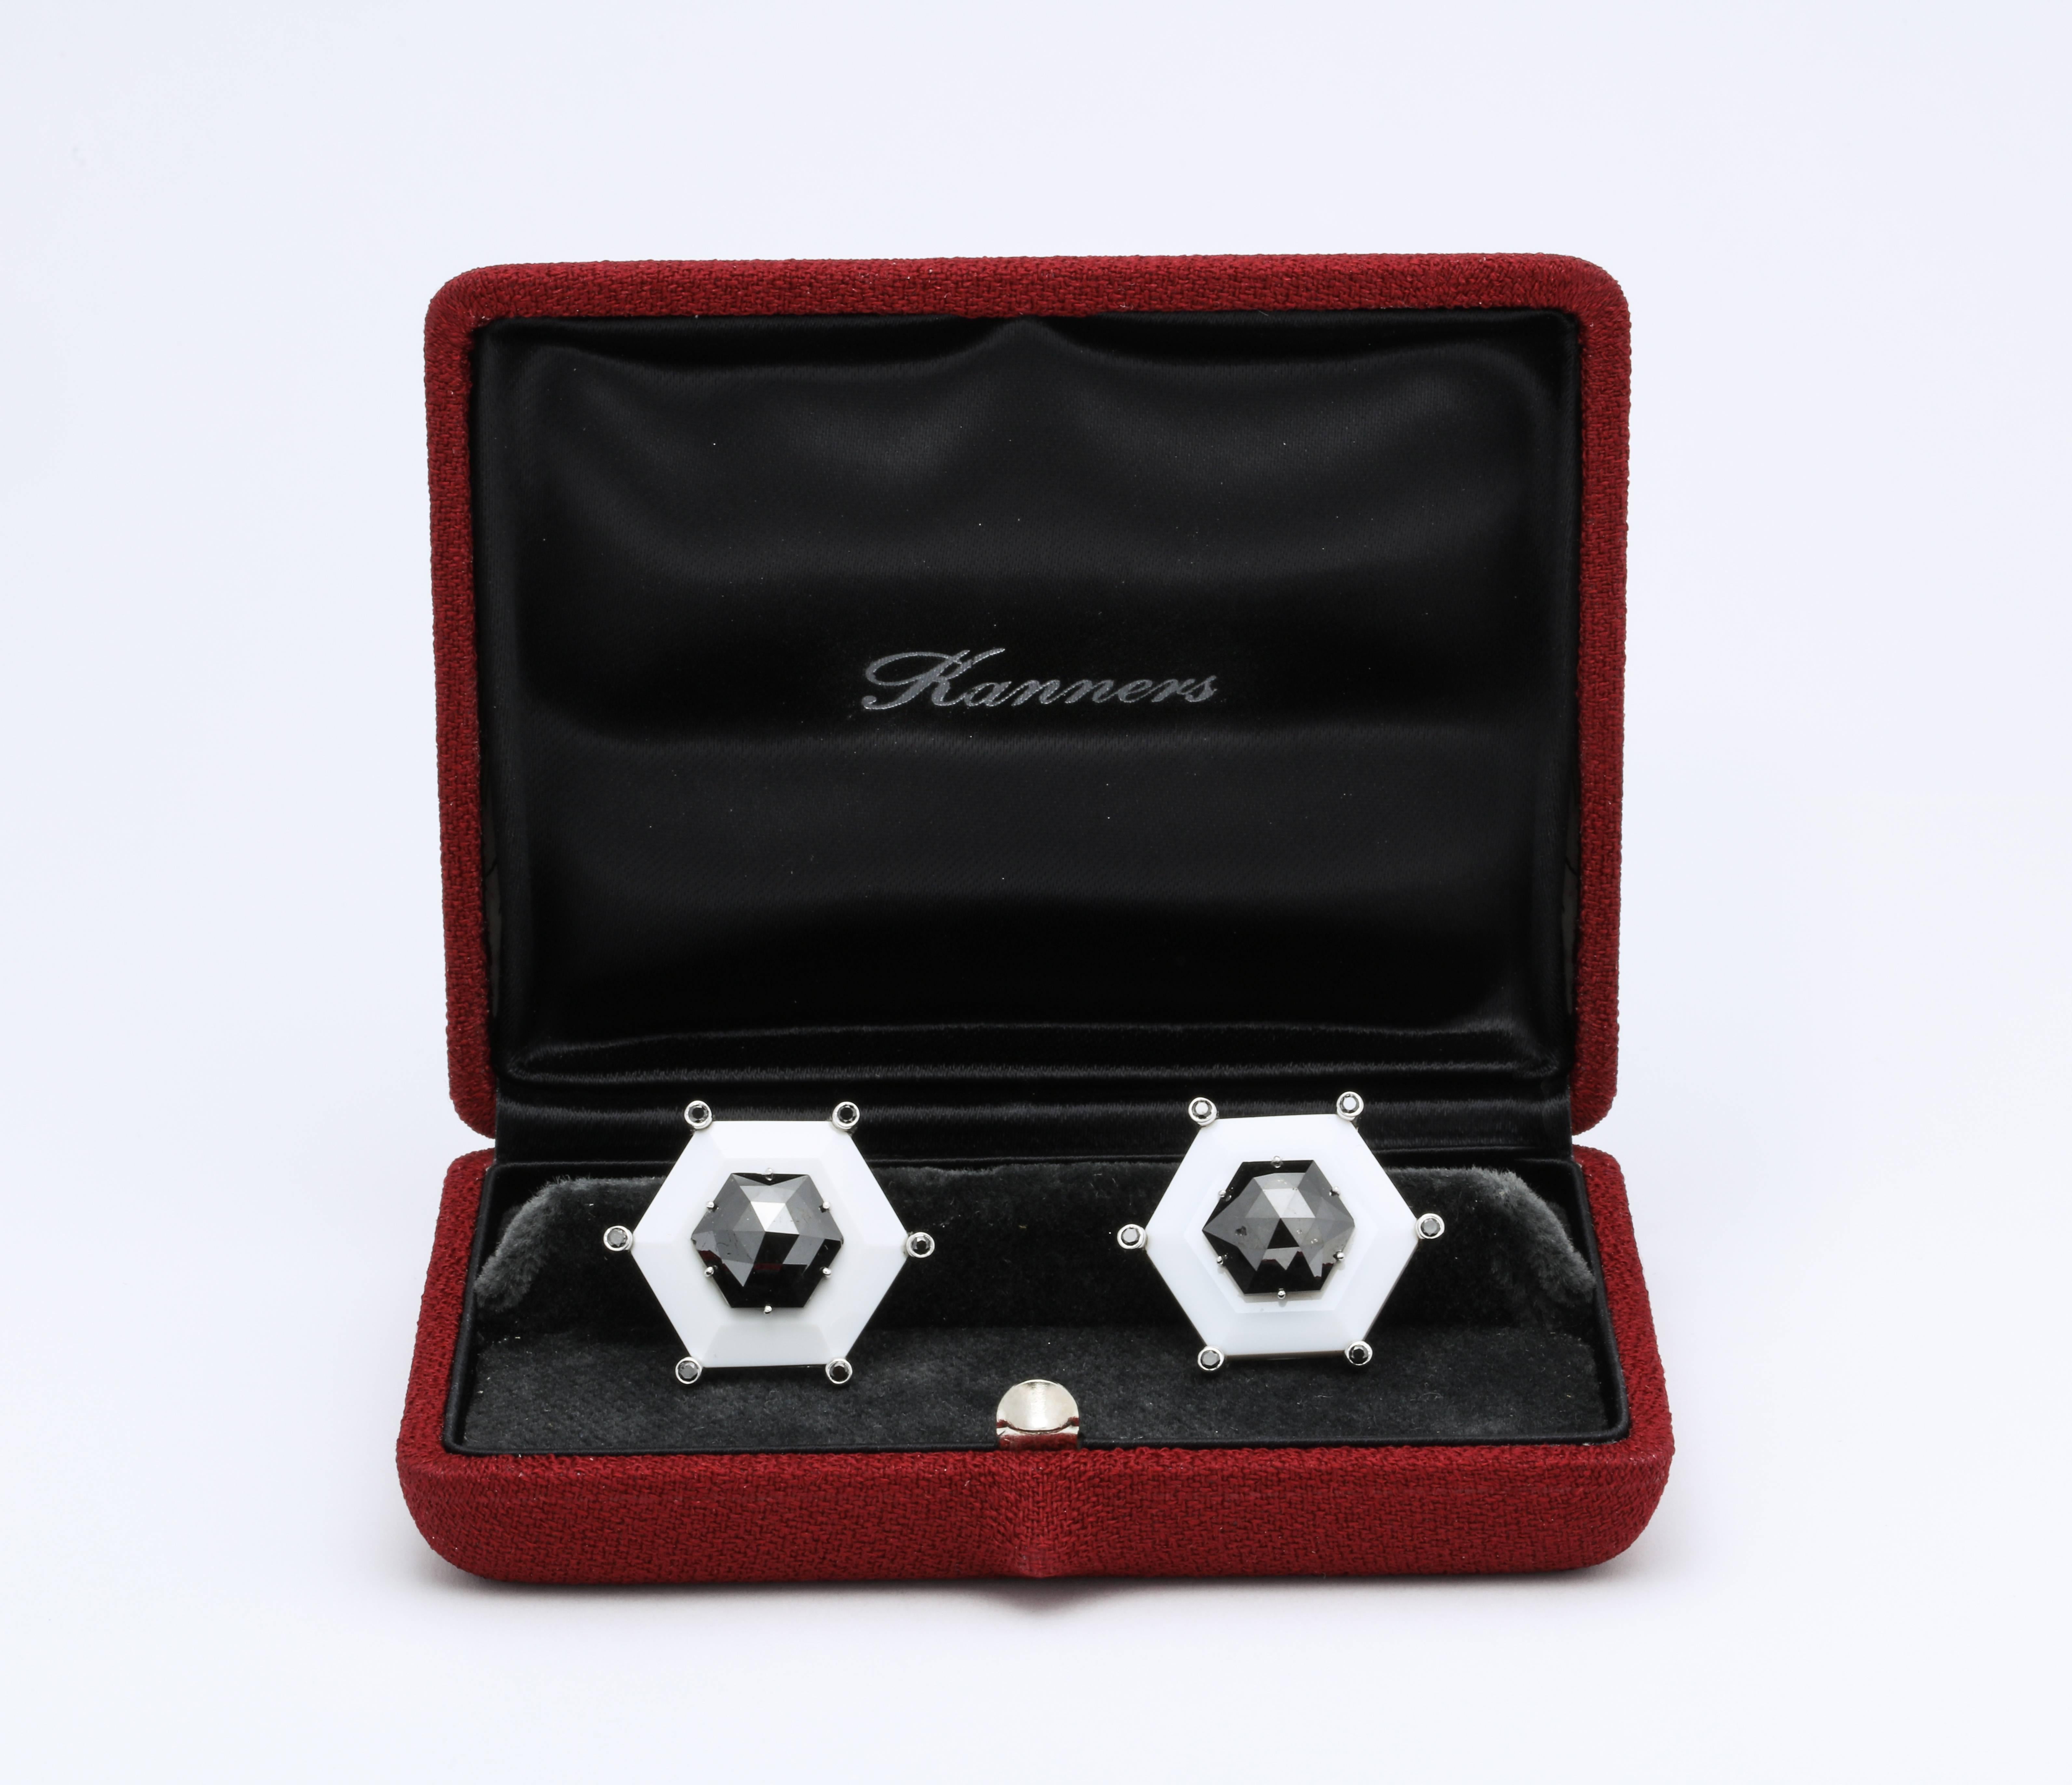 Contemporary One of a Kind Black Diamond Cufflinks by Michael Kanners